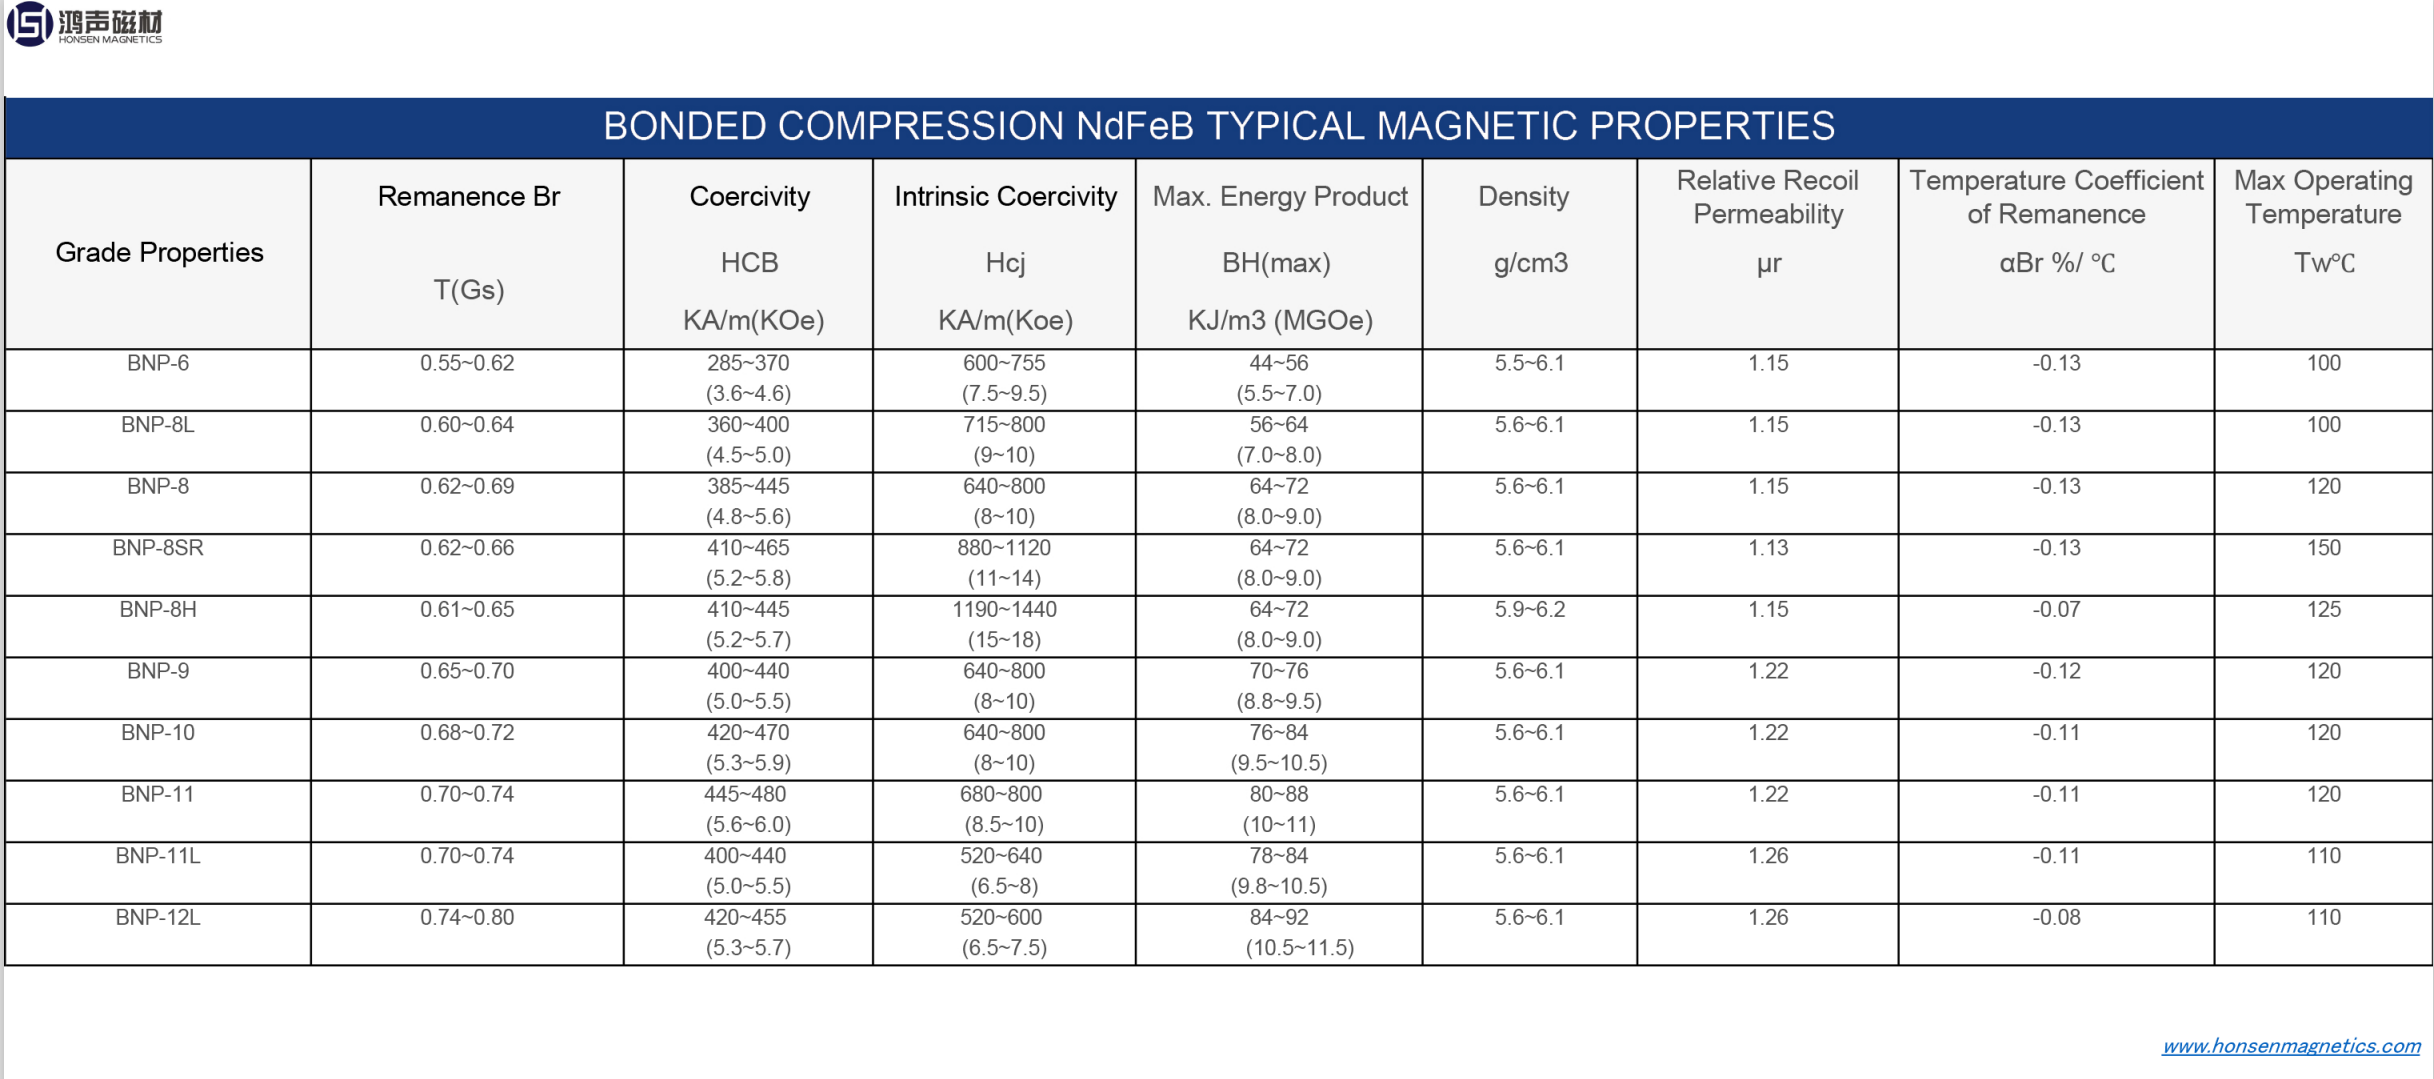 Bonded Compression NdFeB Typical Magnetic Properties